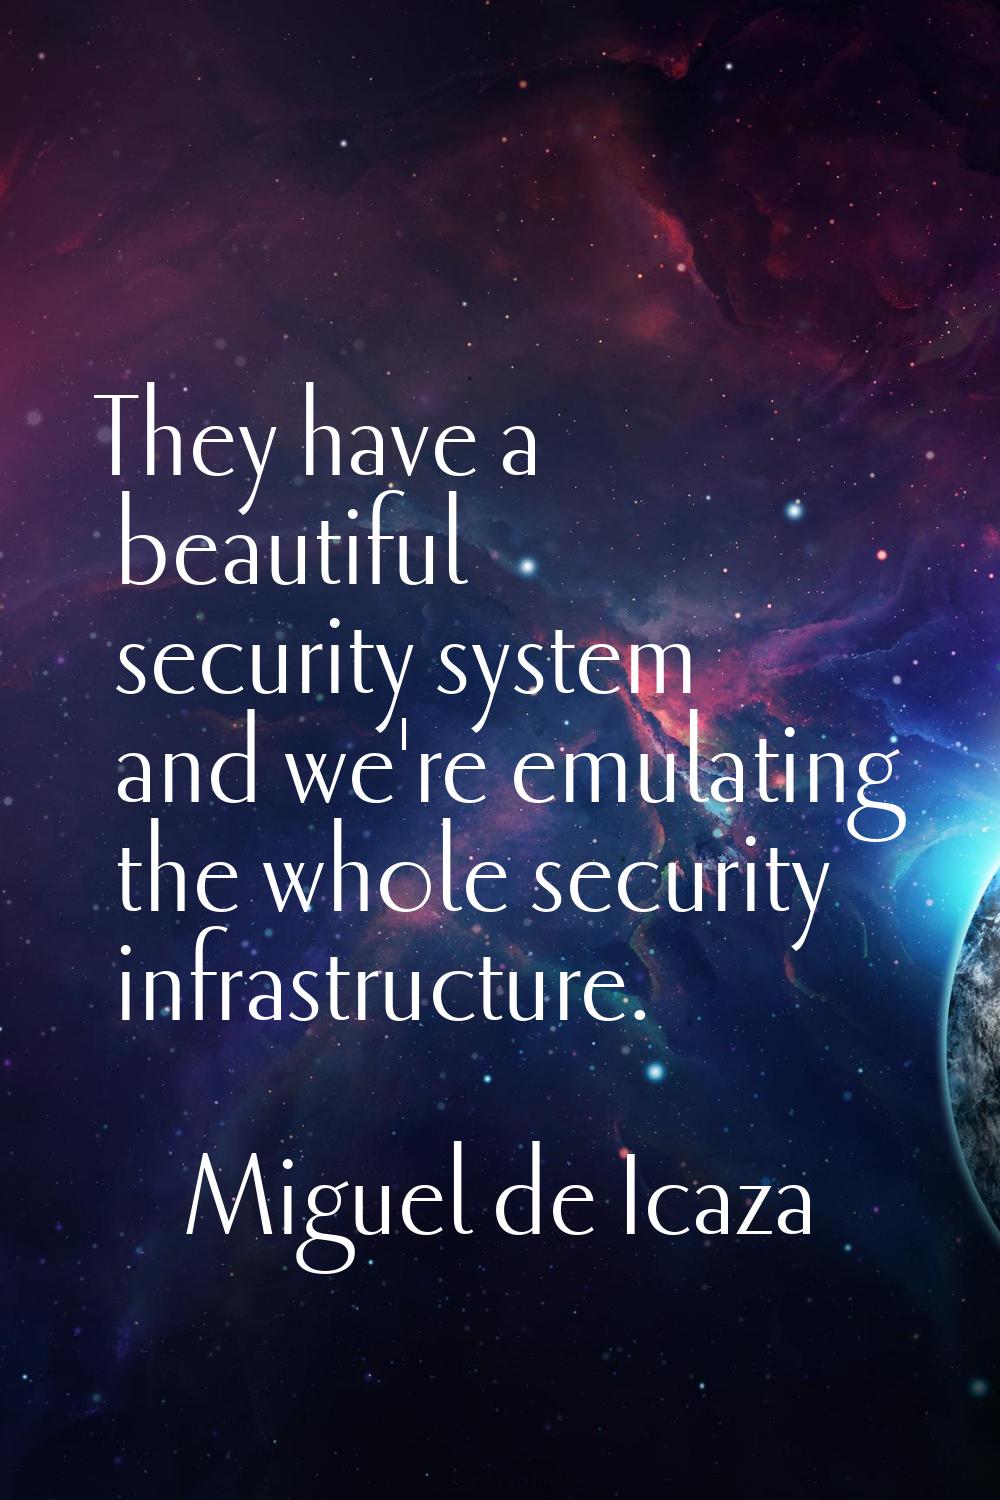 They have a beautiful security system and we're emulating the whole security infrastructure.